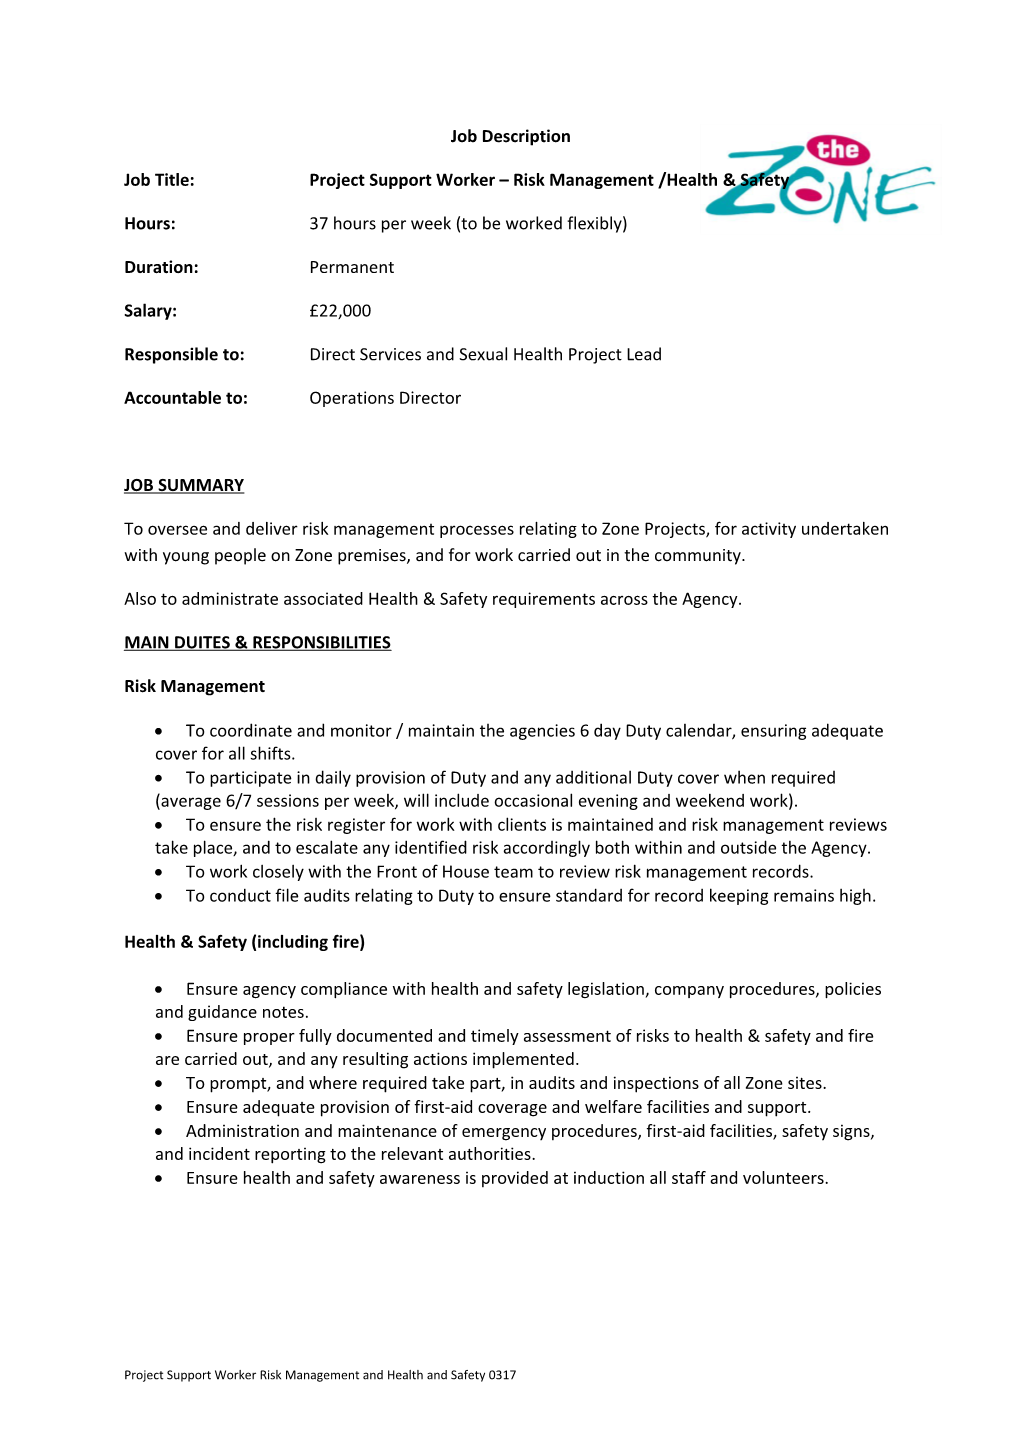 Job Title:Project Support Worker Risk Management /Health & Safety